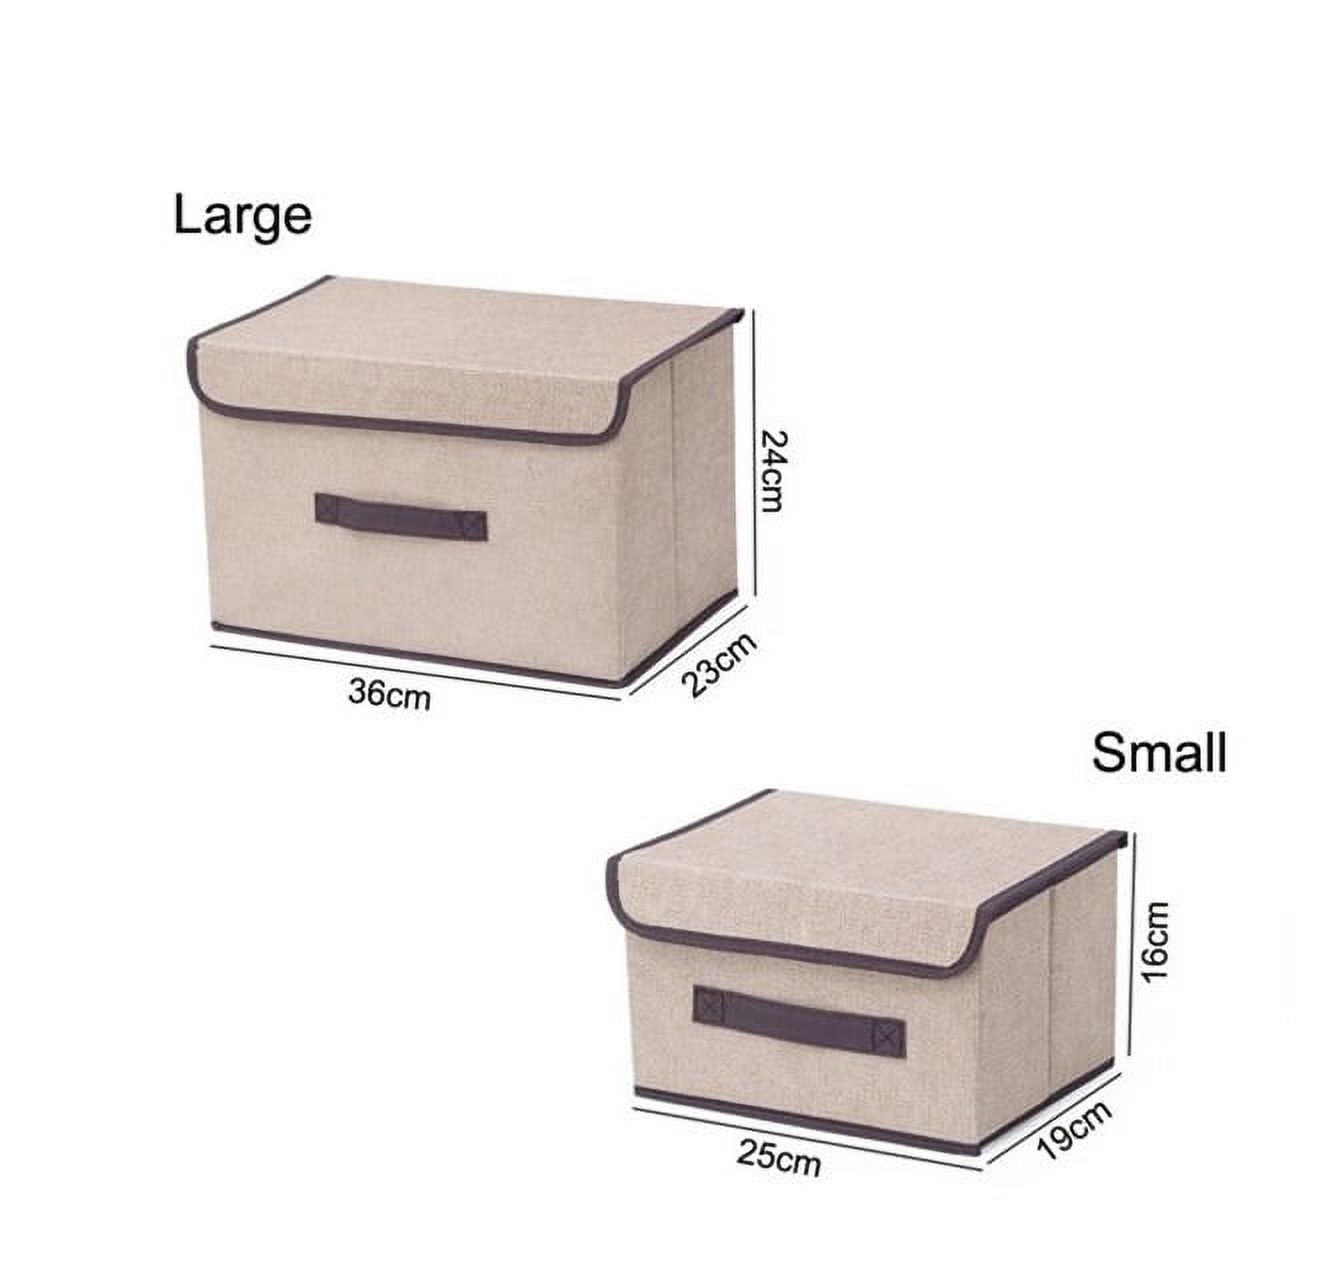 Topboutique Storage Boxes with Lids 2 Pack Foldable Kids Toy Storage Basket , Khaki Collapsible Washable Cube Large & Small Storage Bins with Lids for Ornament